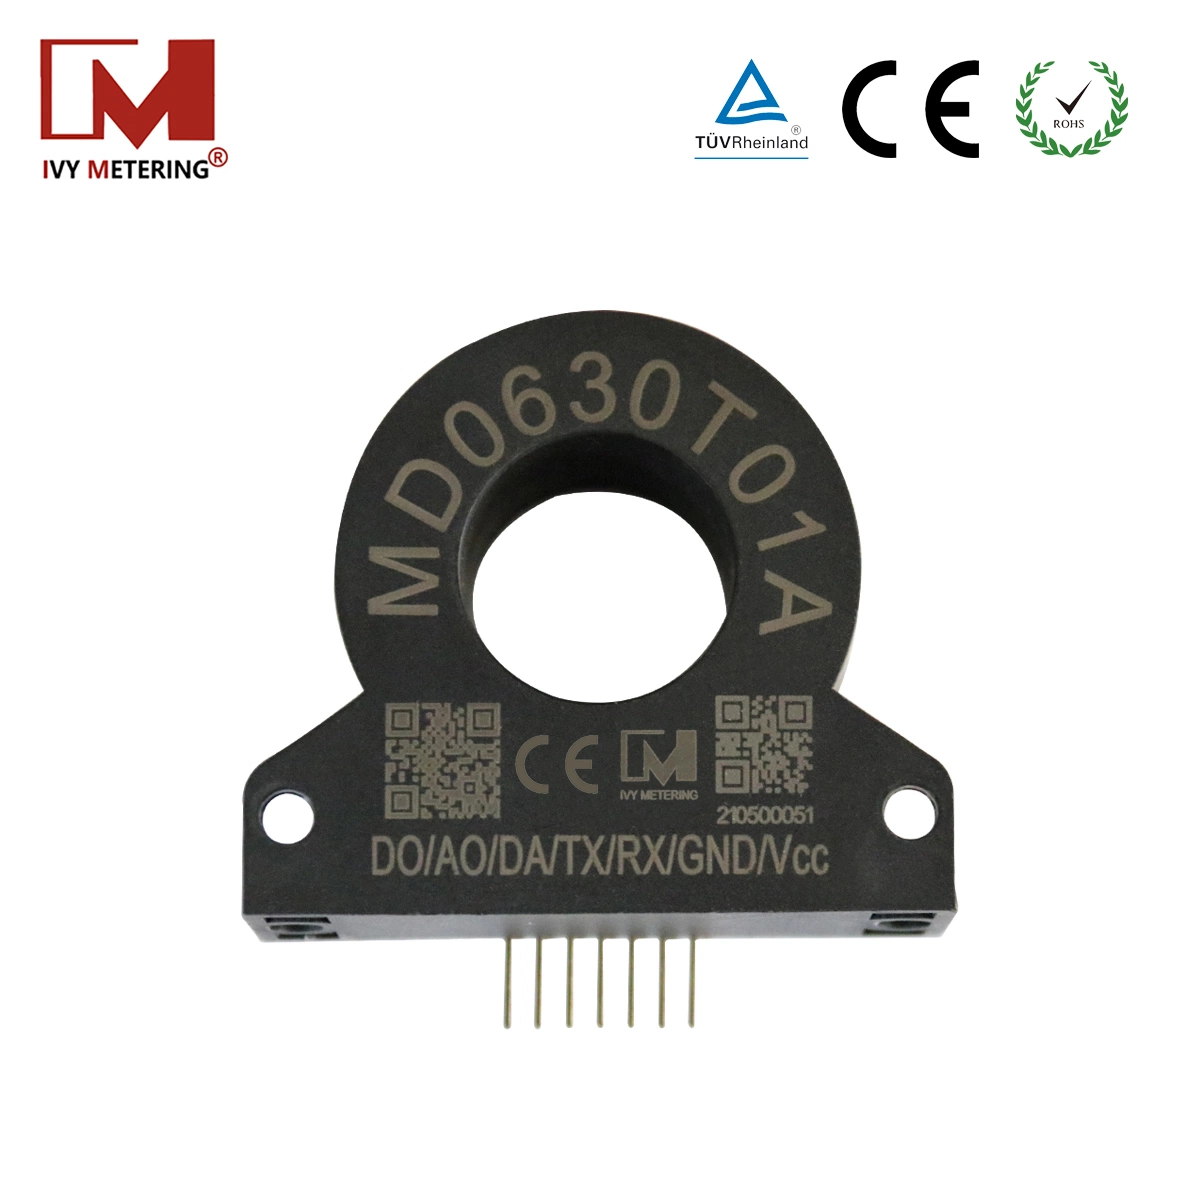 PCB Mount AC/DC Ma Earth Leakage Current Transformer for Electric Vehicle Charging